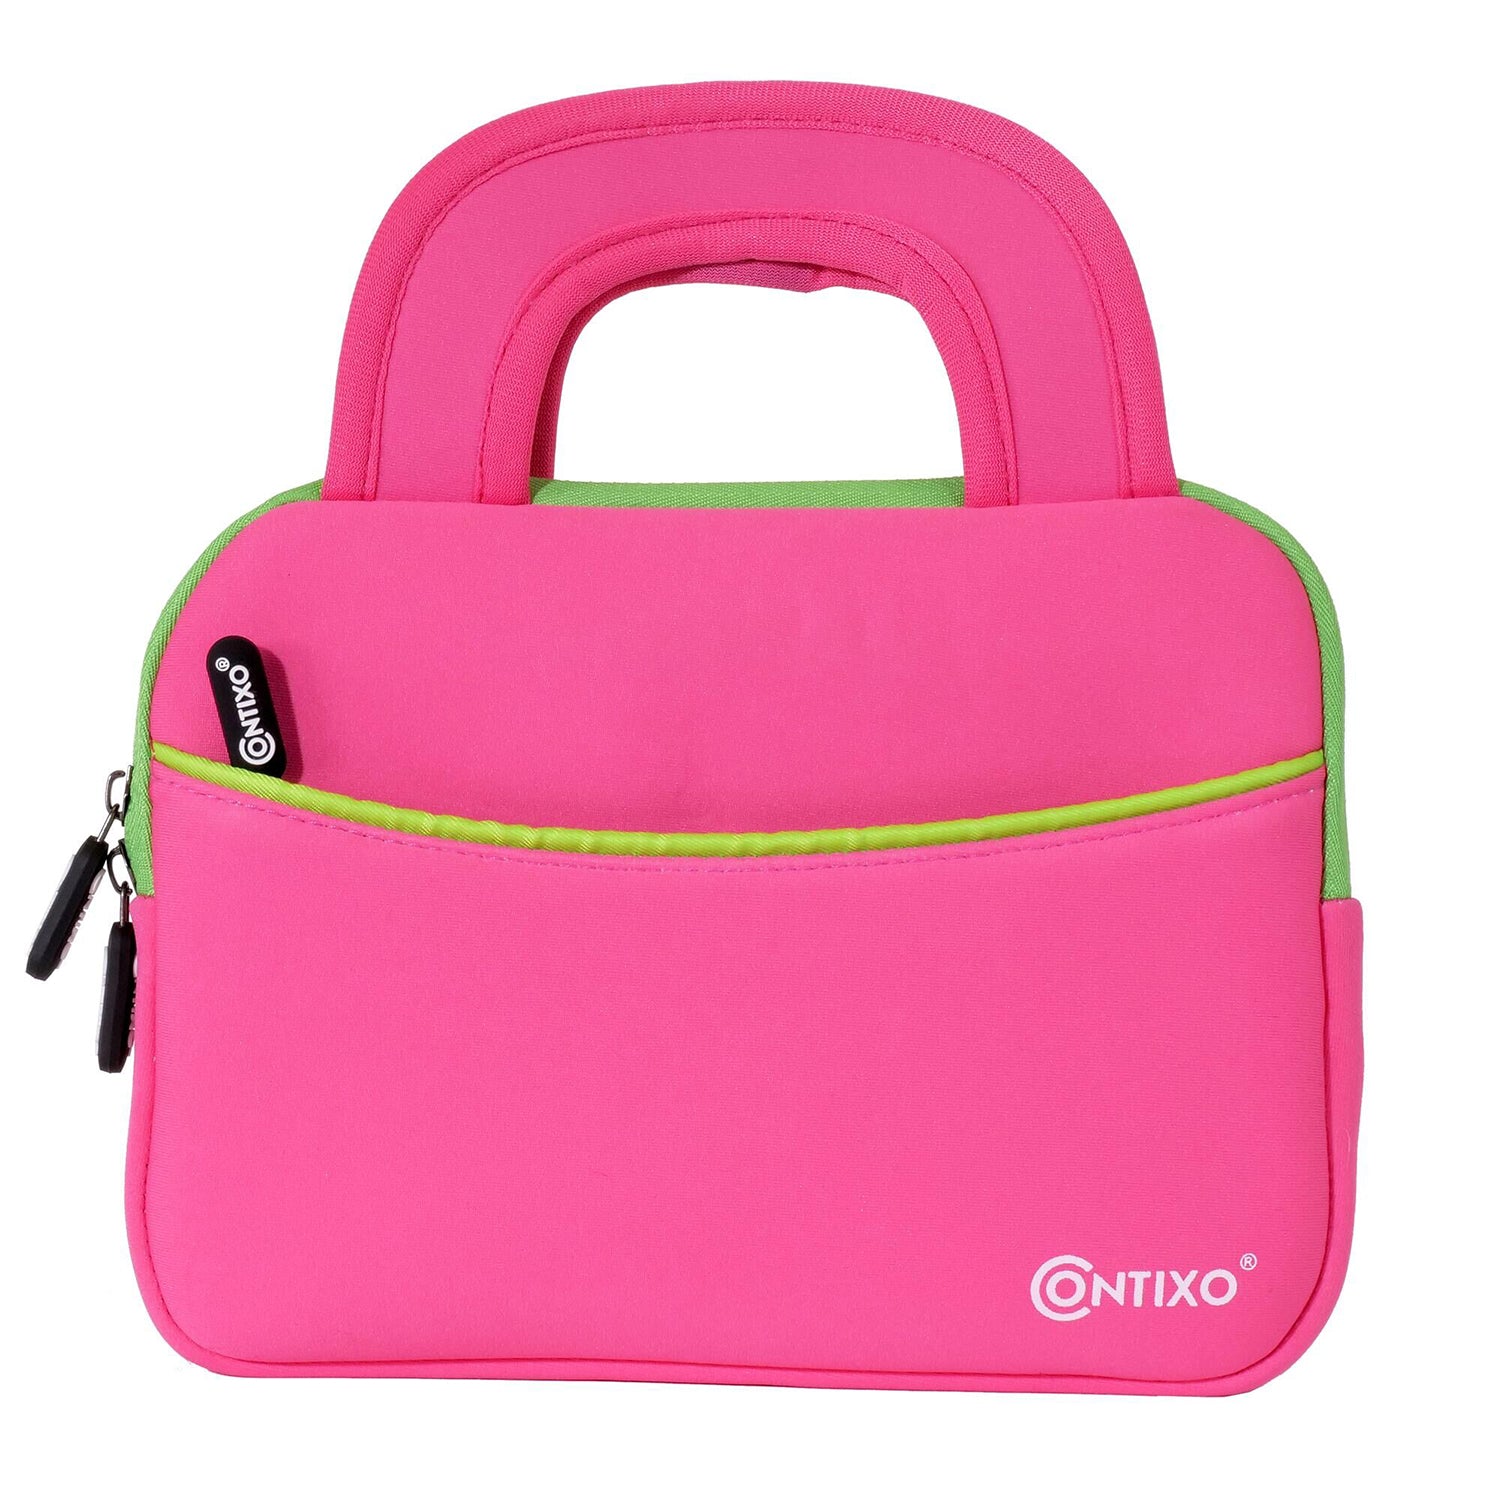 Contixo Protective Carrying Bag Sleeve Case for 7" Tablets